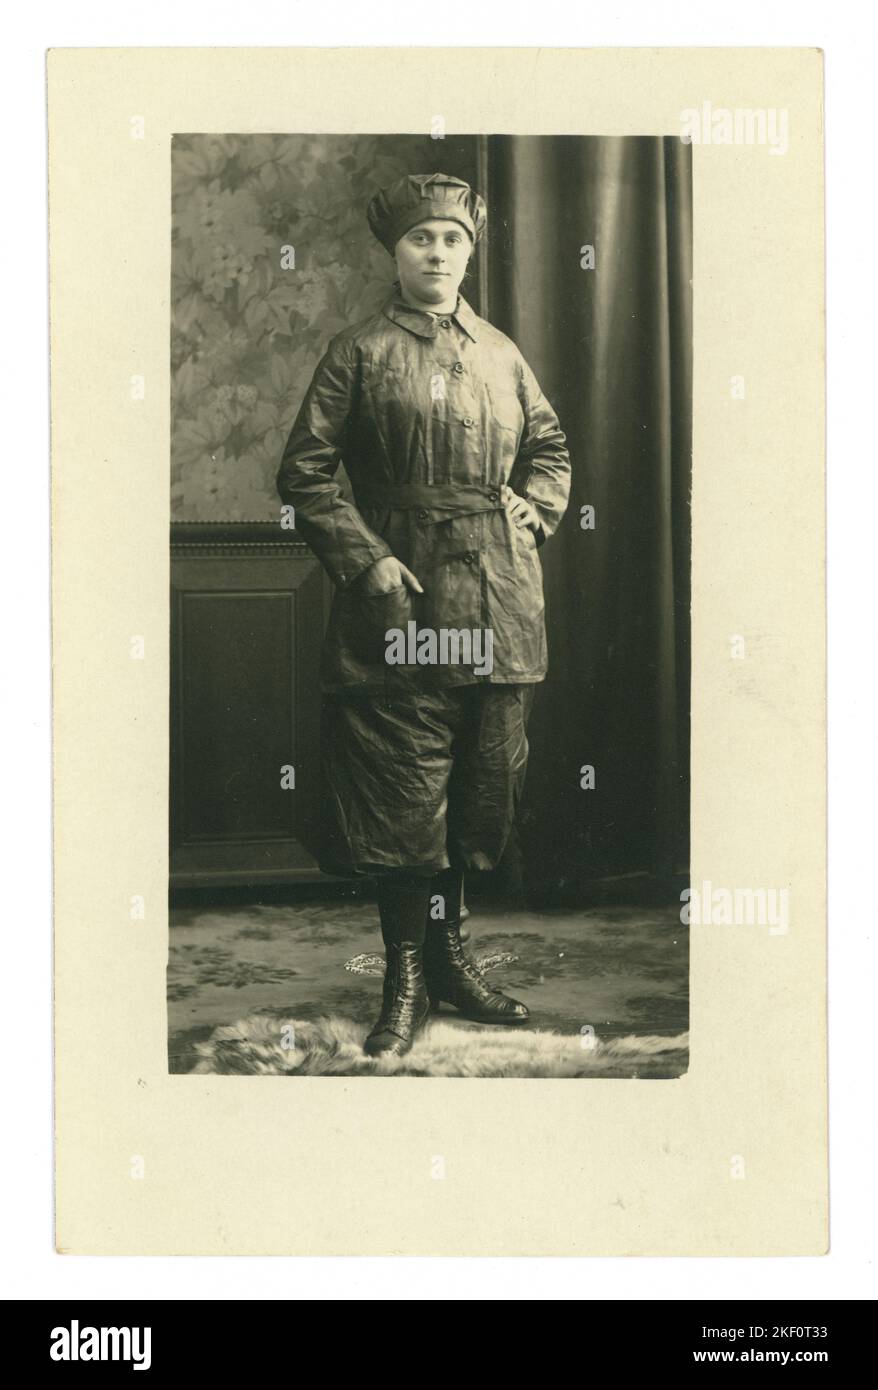 Voluntary service world war one factory worker Cut Out Stock Images ...